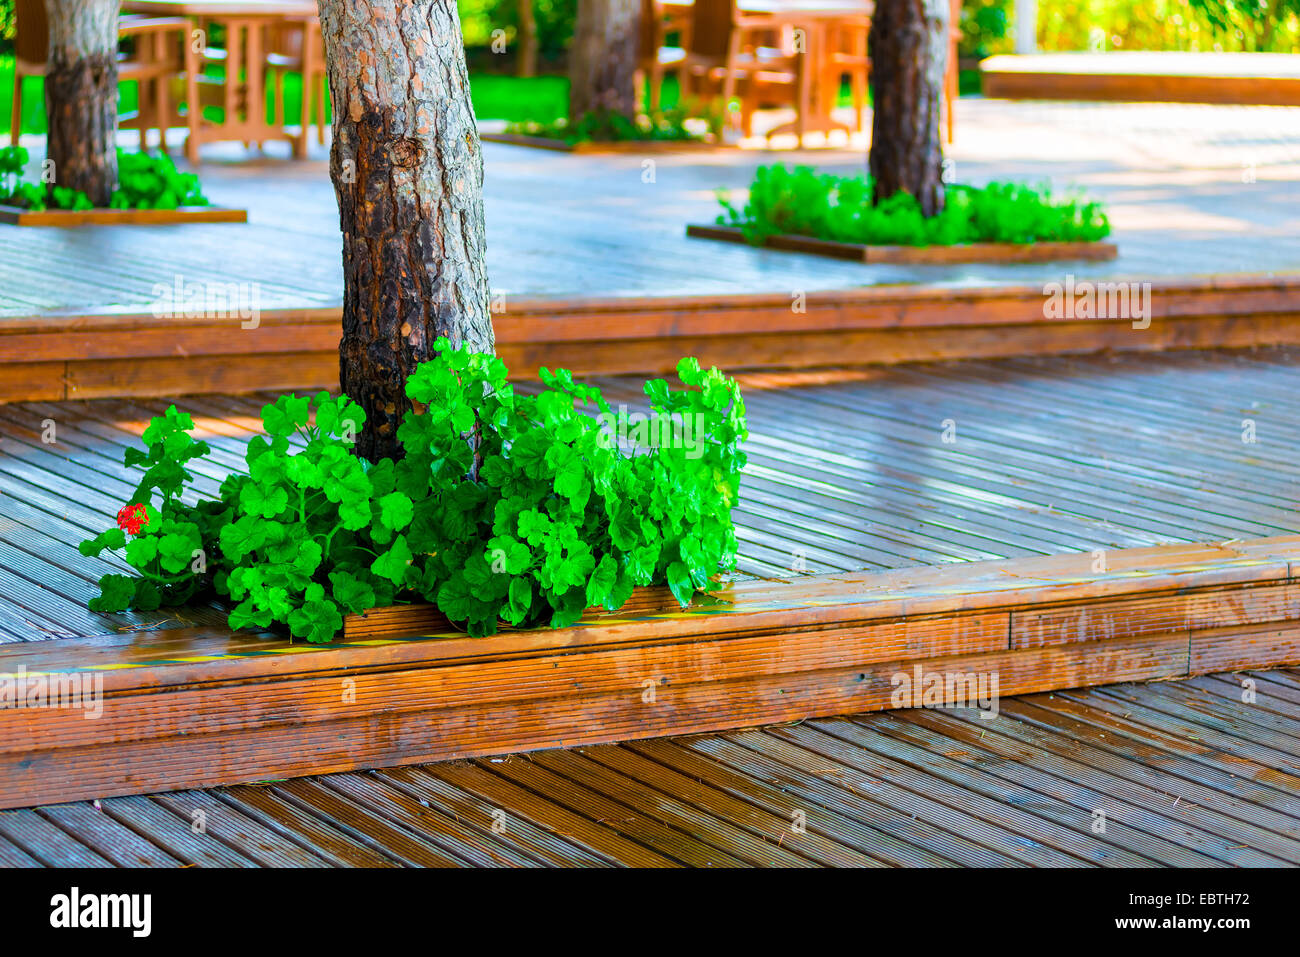 wooden flooring in the park and well maintained trees Stock Photo